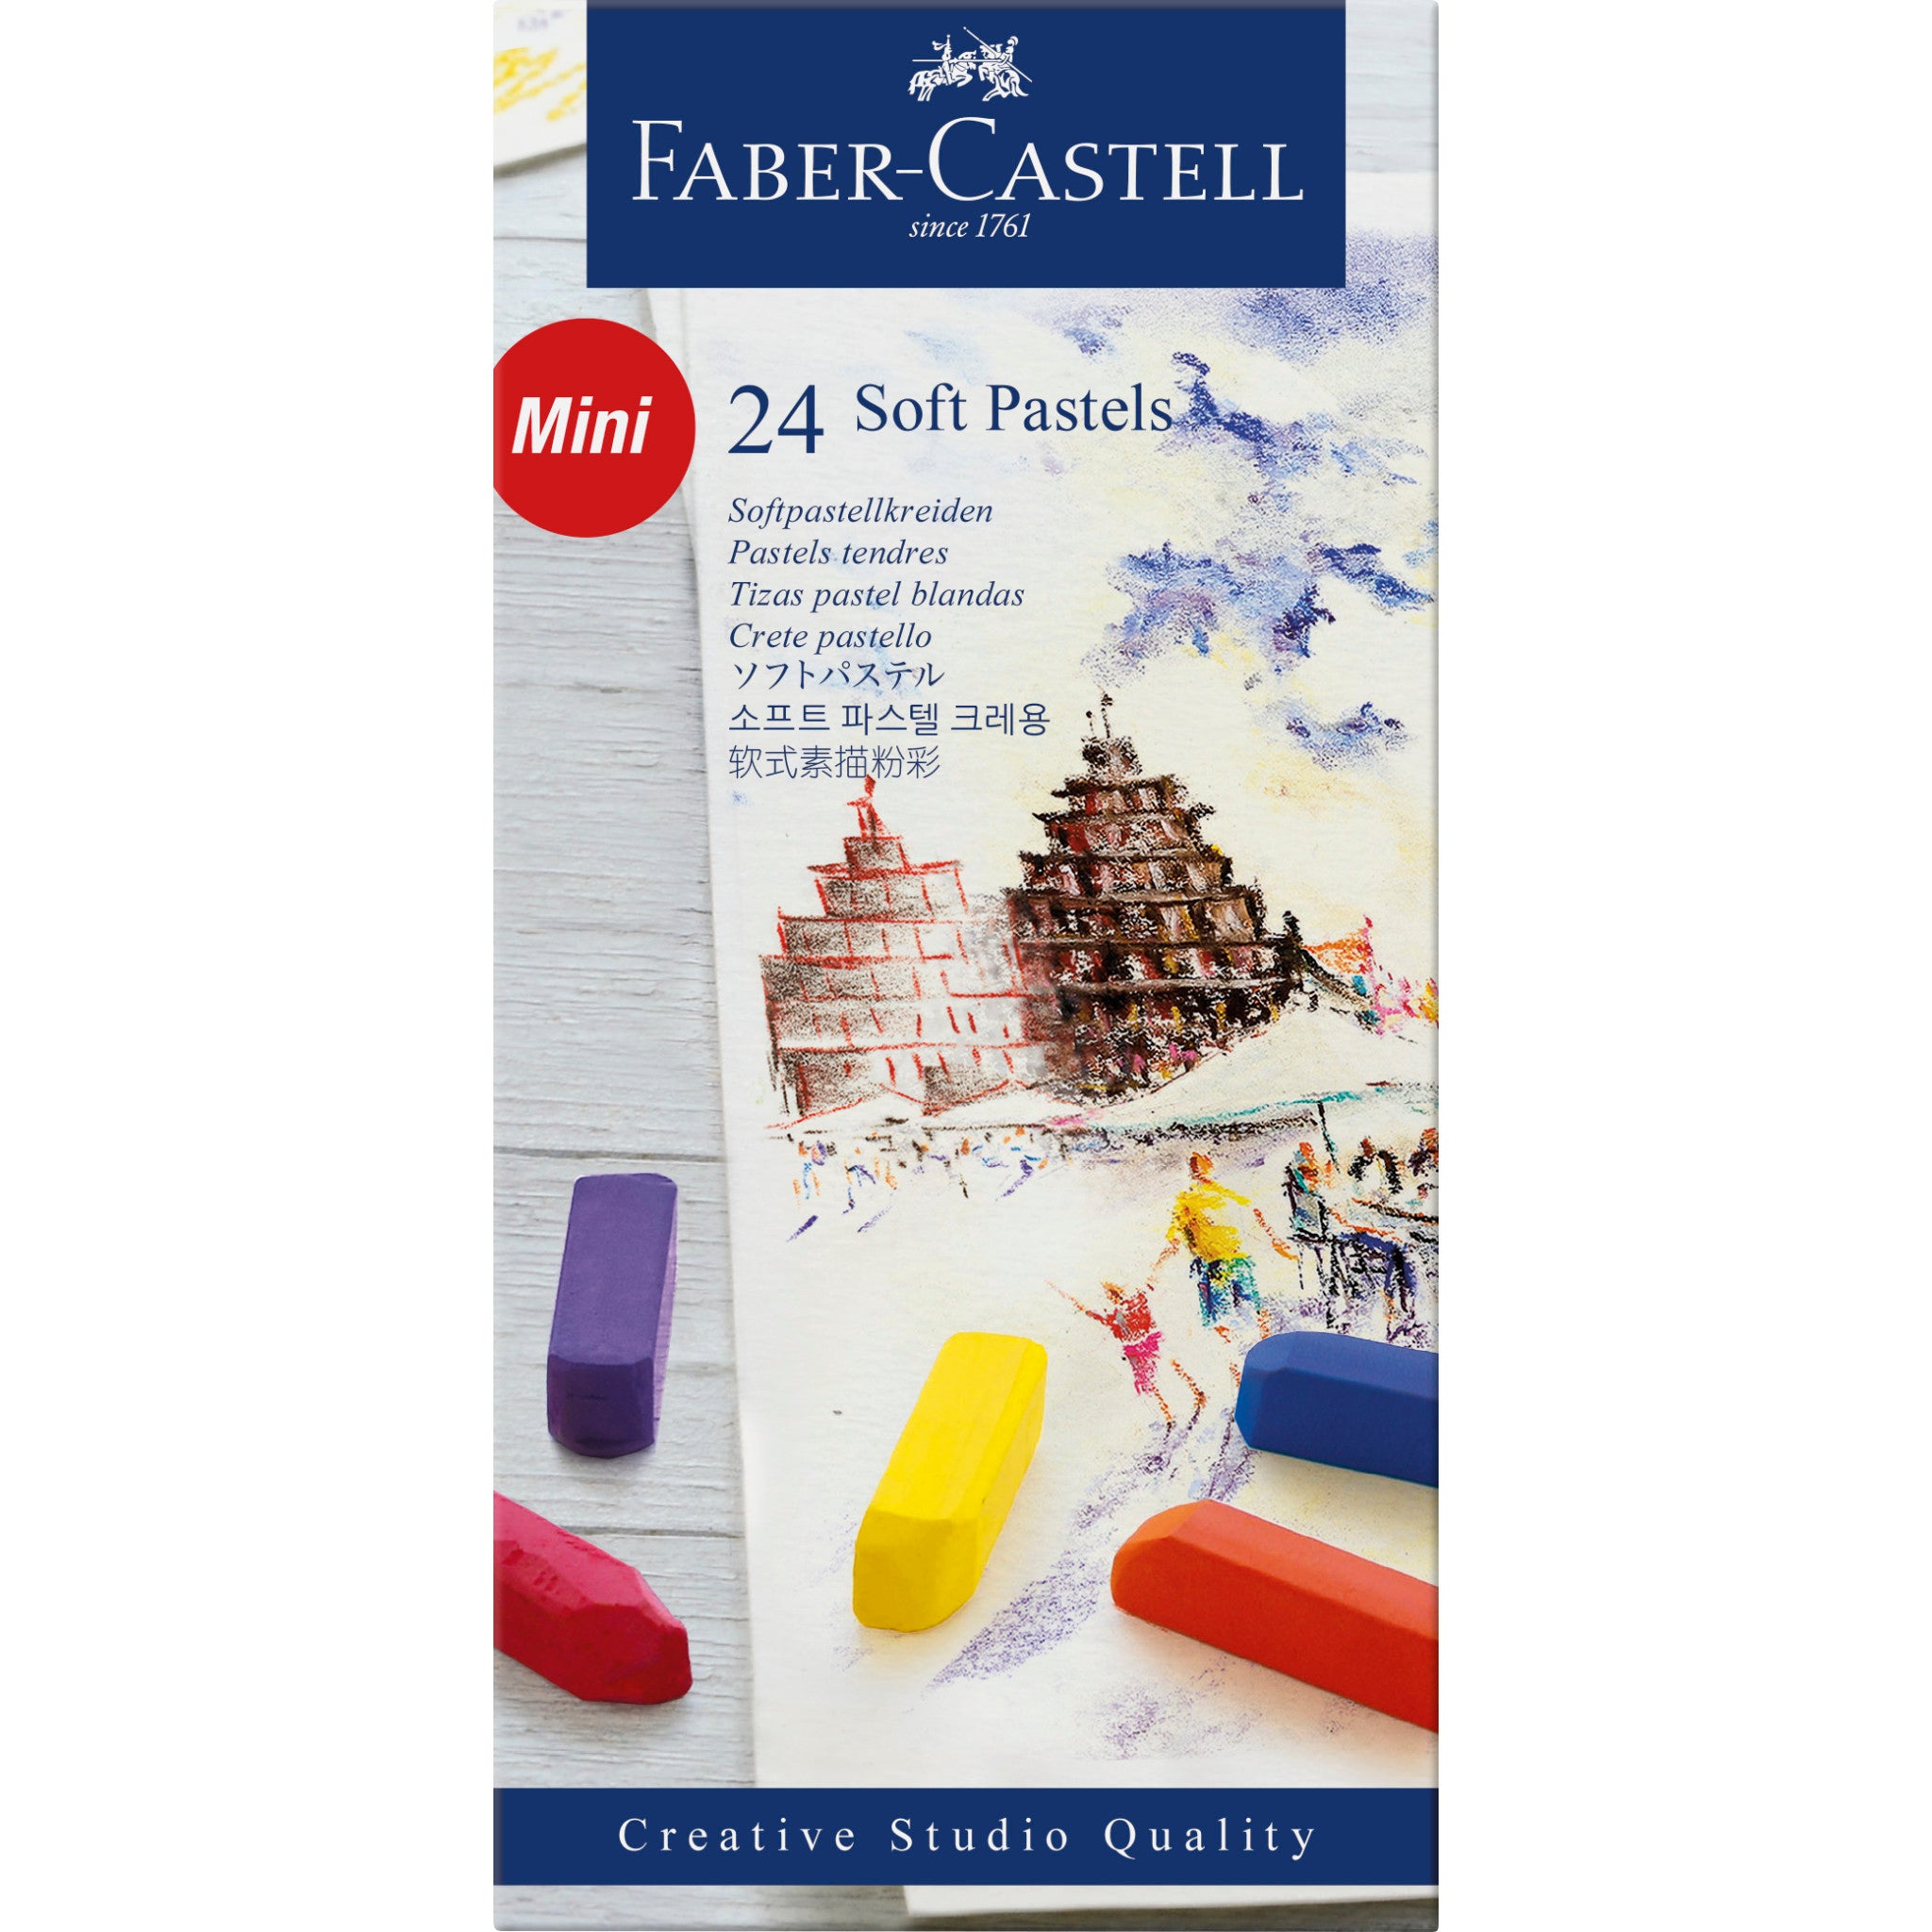 NET) Faber Castell A4 soft cover display book, 60pkts